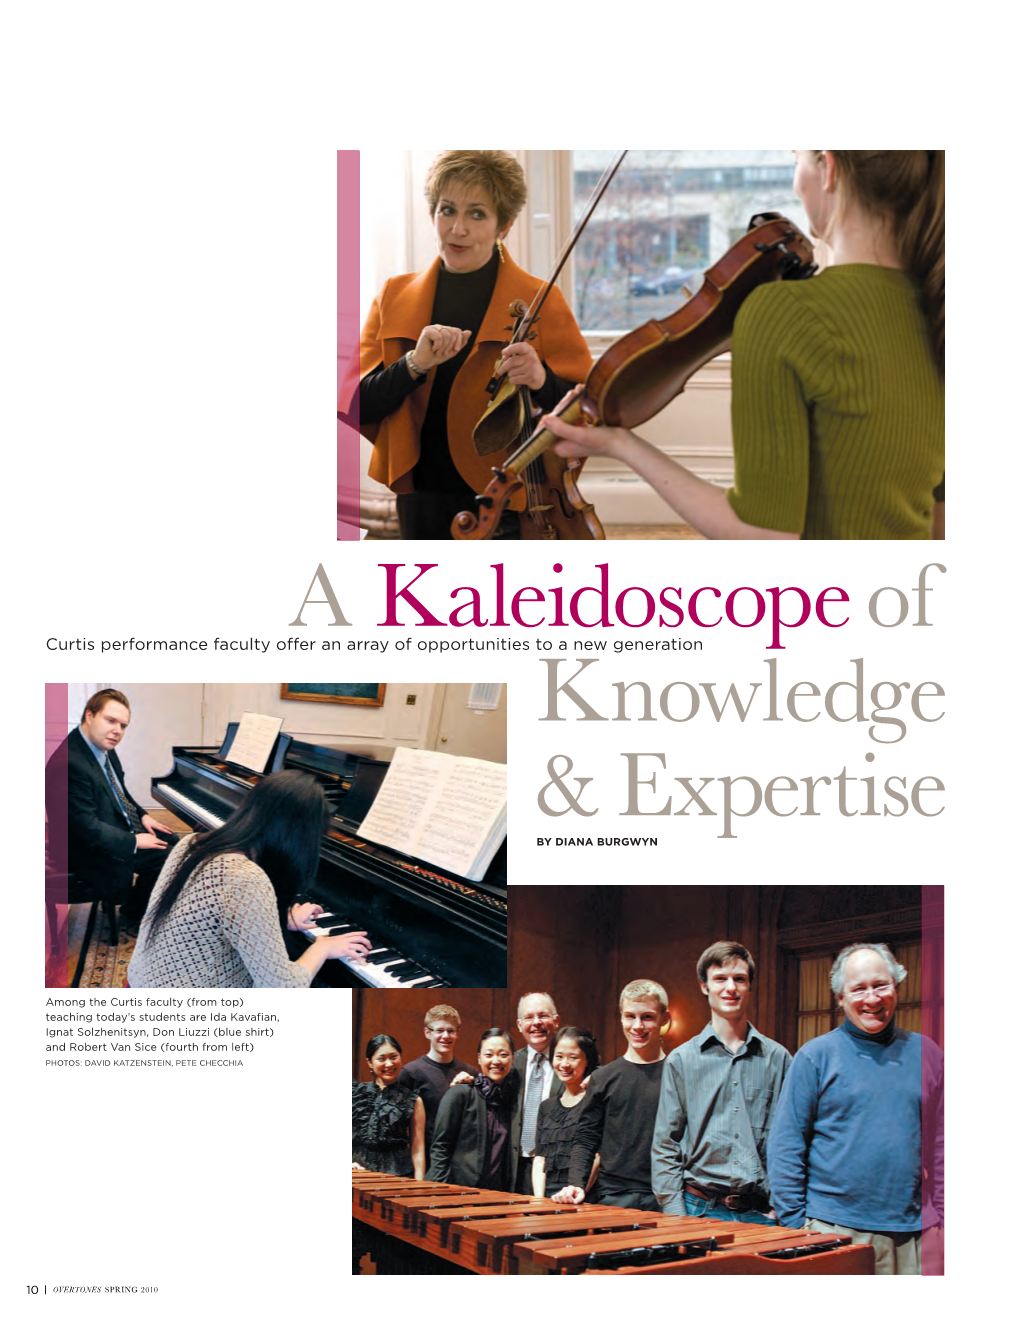 A Kaleidoscope of Knowledge & Expertise